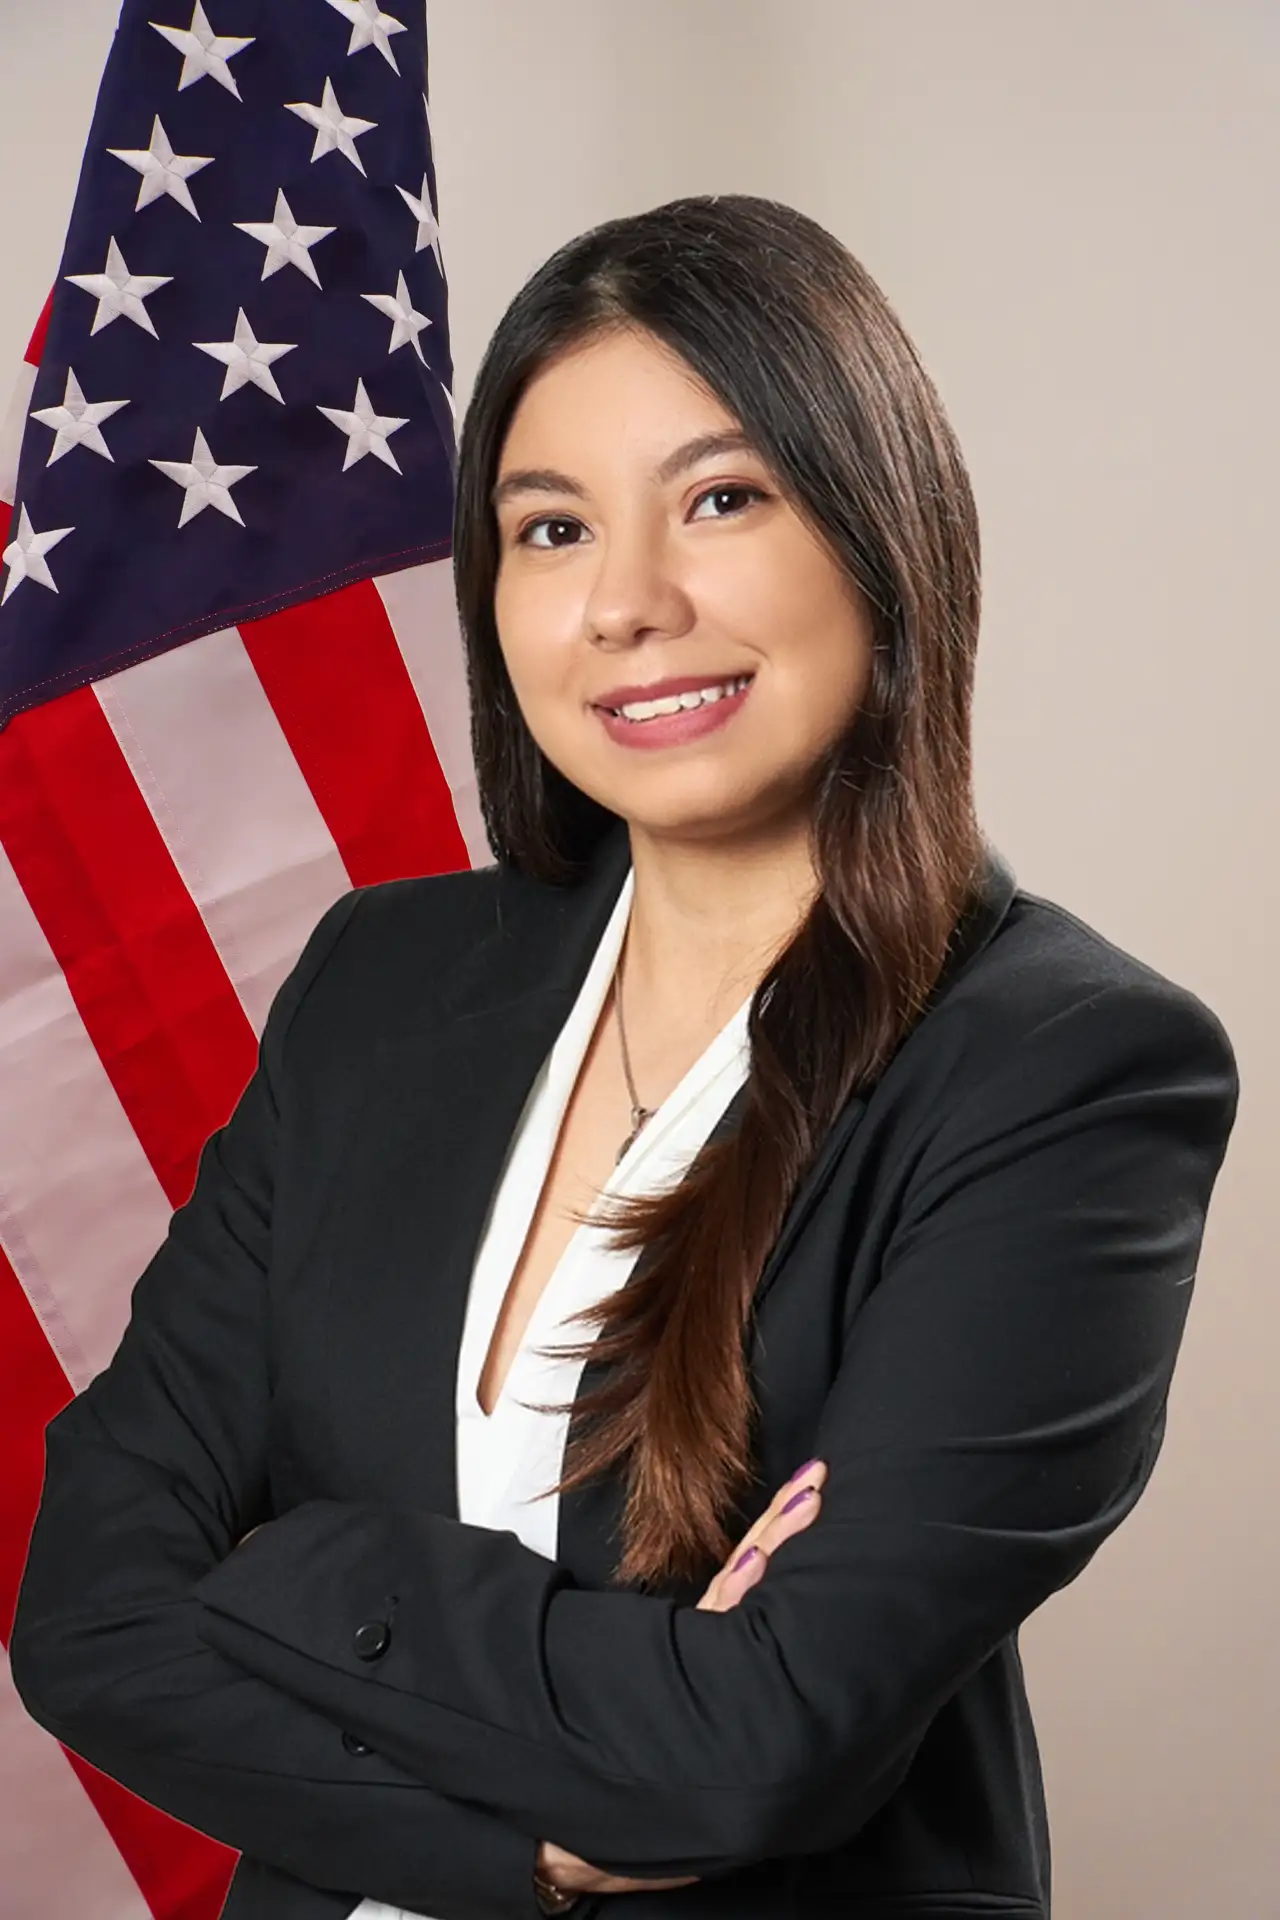 Woman Portrait of Office Administrator | Expert Guidance for P Visa | U.S. Immigration Law Counsel